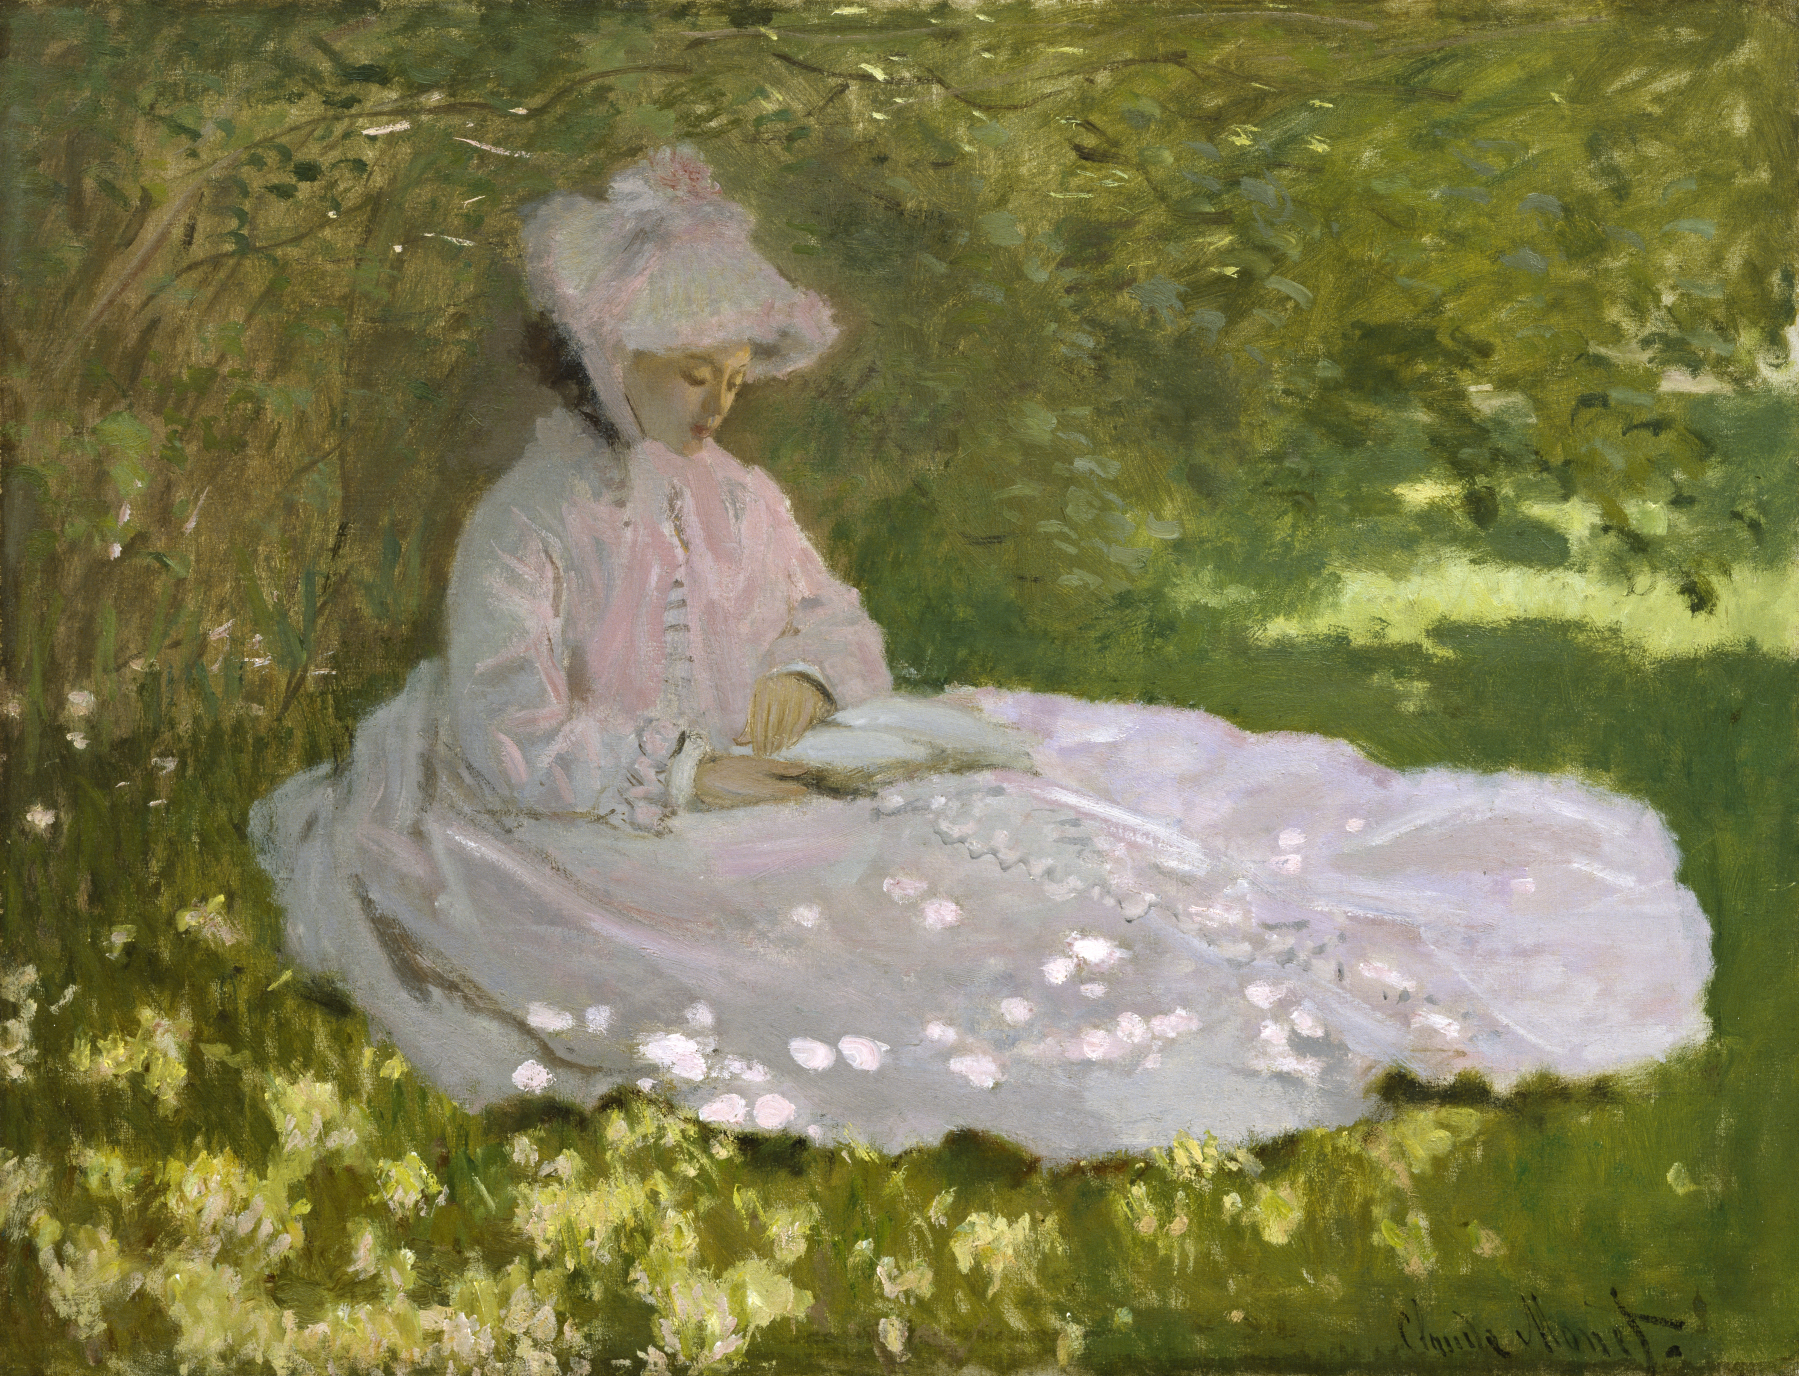 Claude Monet, Springtime, oil on canvas, 1872 (Walters Art Museum, Baltimore). Photo by Gandalf's Gallery, CC BY-NC-SA 2.0.